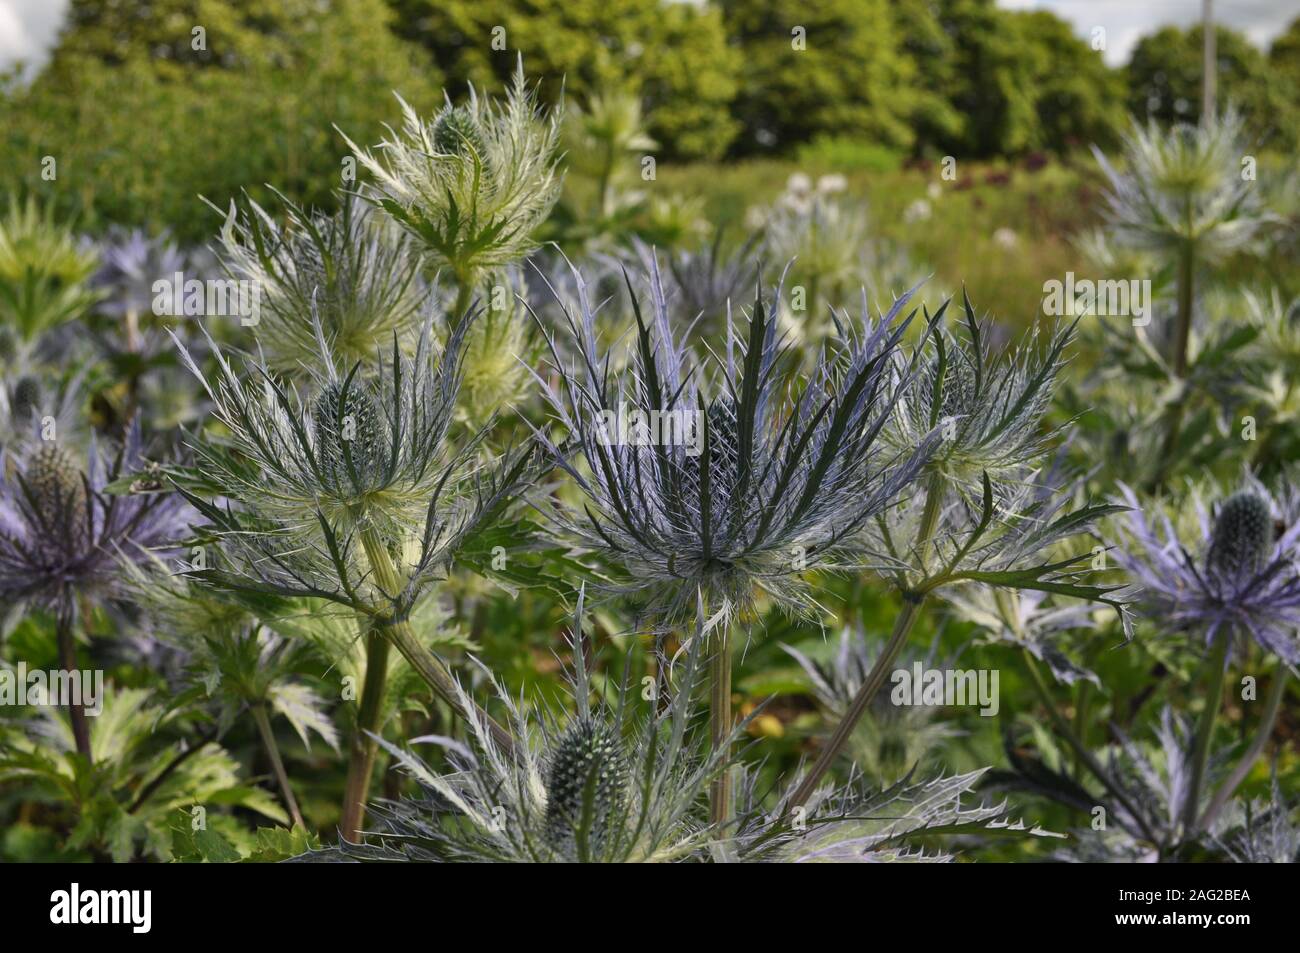 Flower bed of Eryngium or Eryngo, commonly known as Sea Holly Stock Photo